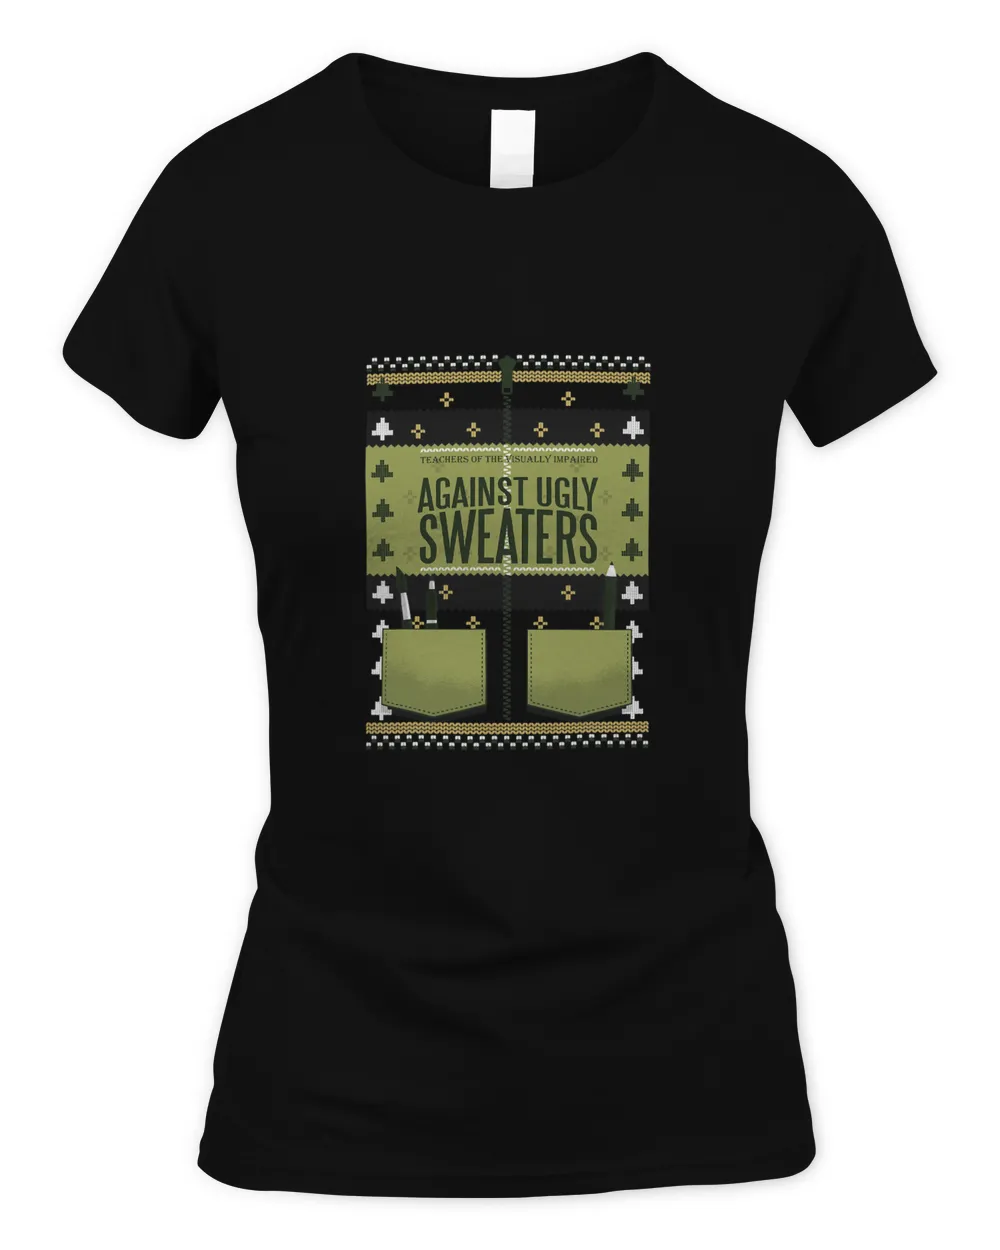 Teachers of the Visually Impaired Against Ugly Sweaters T-Shirt